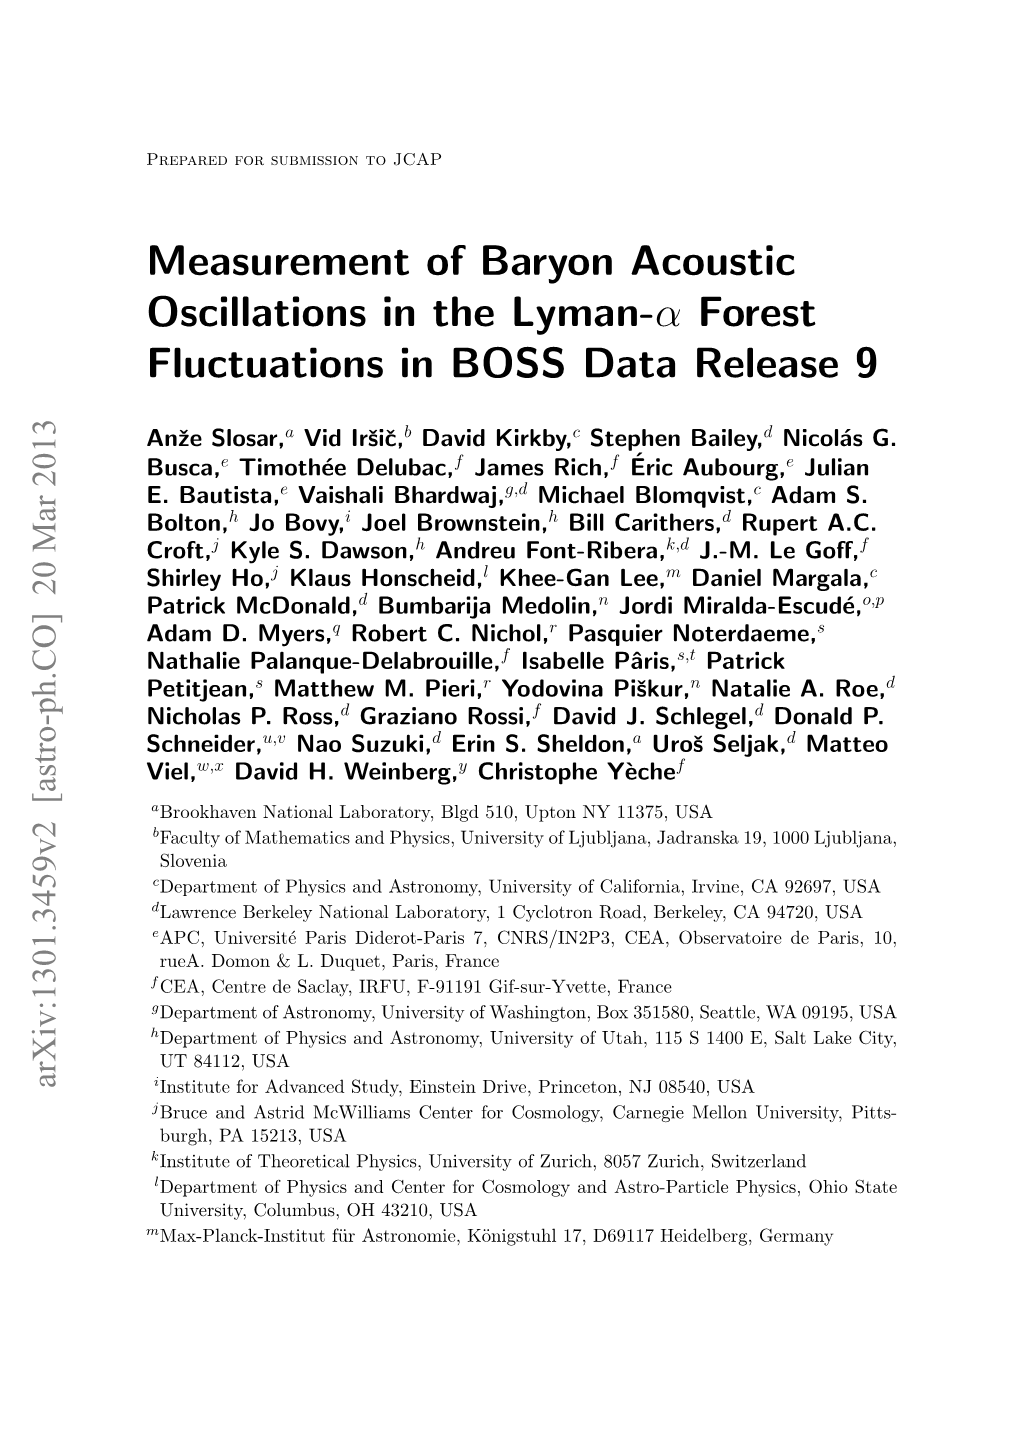 Measurement of Baryon Acoustic Oscillations in the Lyman-Alpha Forest Fluctuations in BOSS Data Release 9